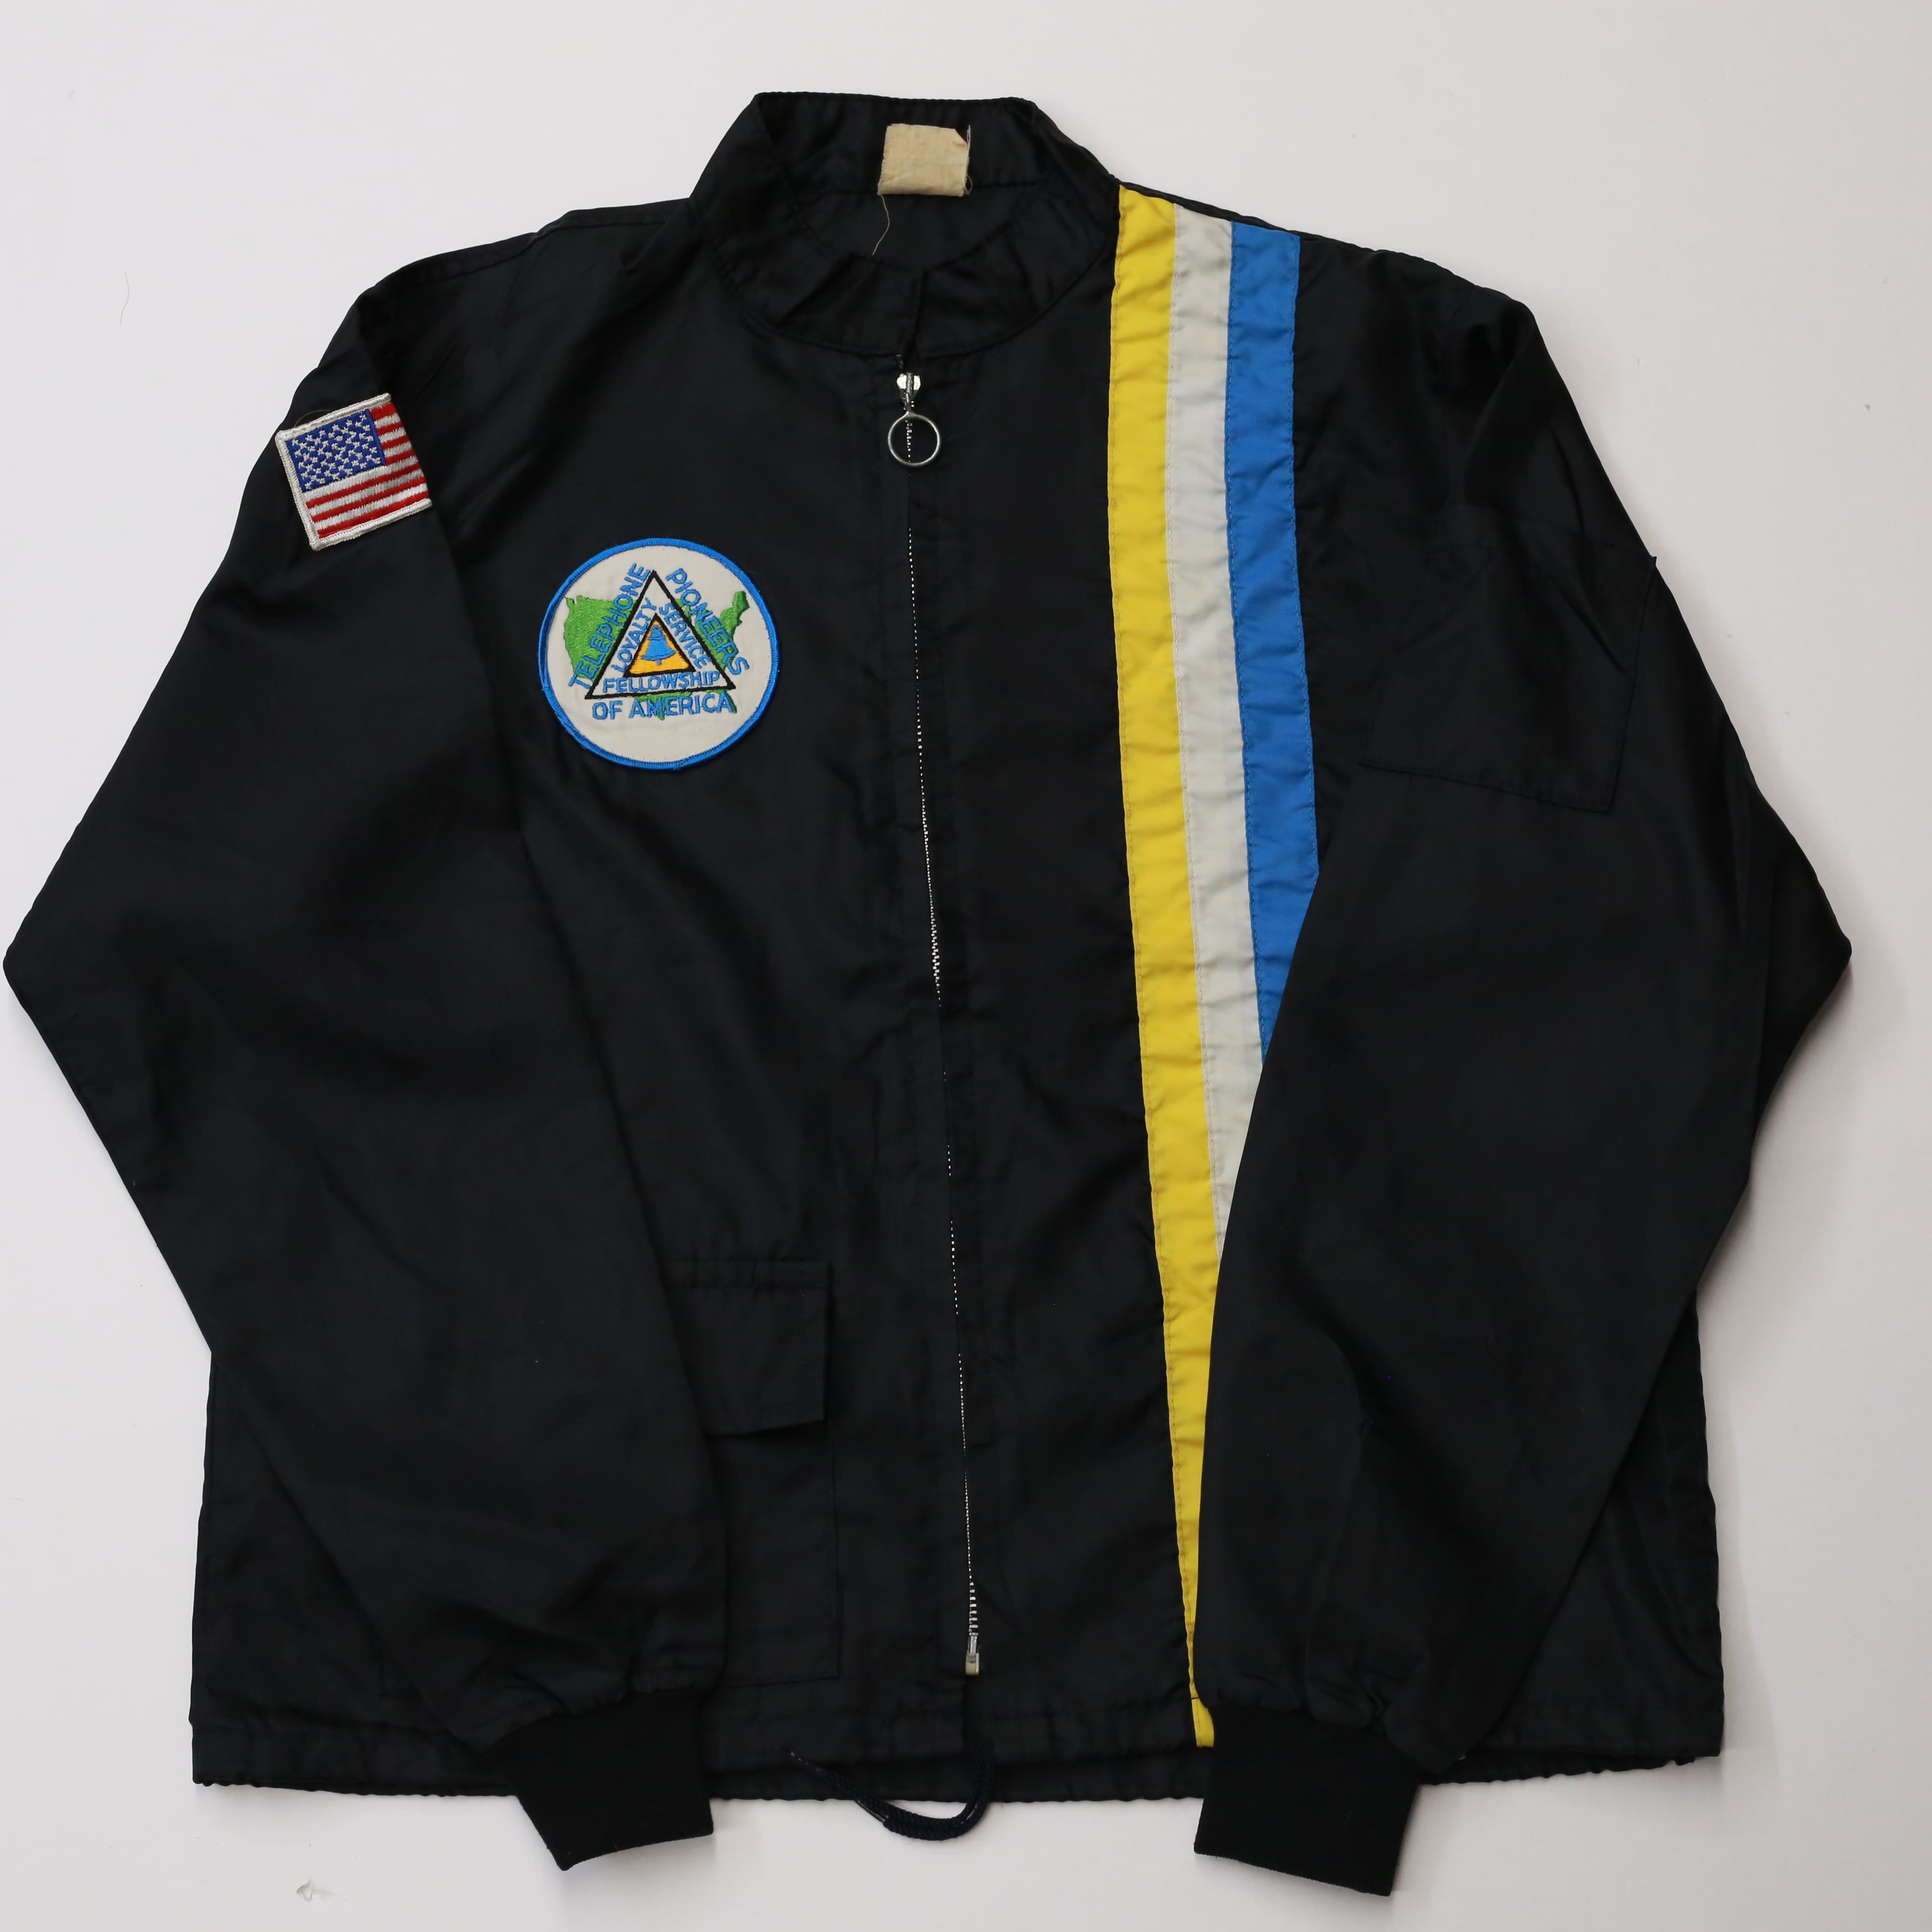 THE GREAT LAKES JACKET 70s レーシングジャケット made in USA ...